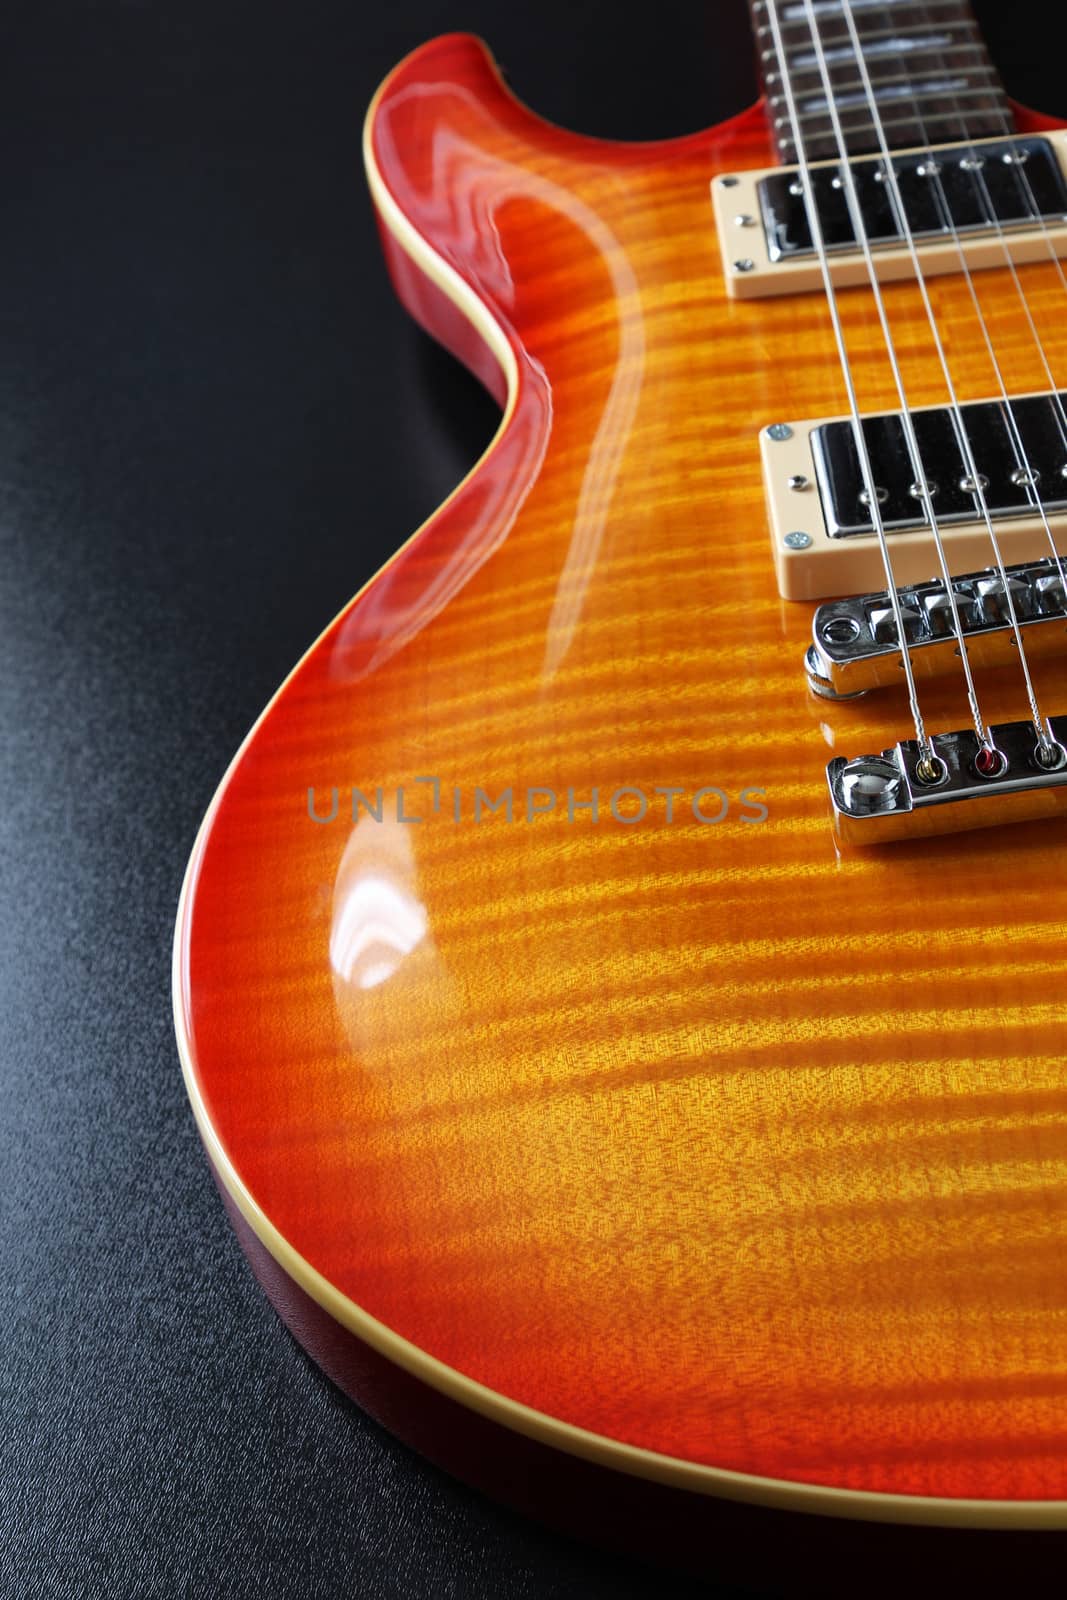 Closeup of electric guitar with cherry sunburst finish and flame maple top.